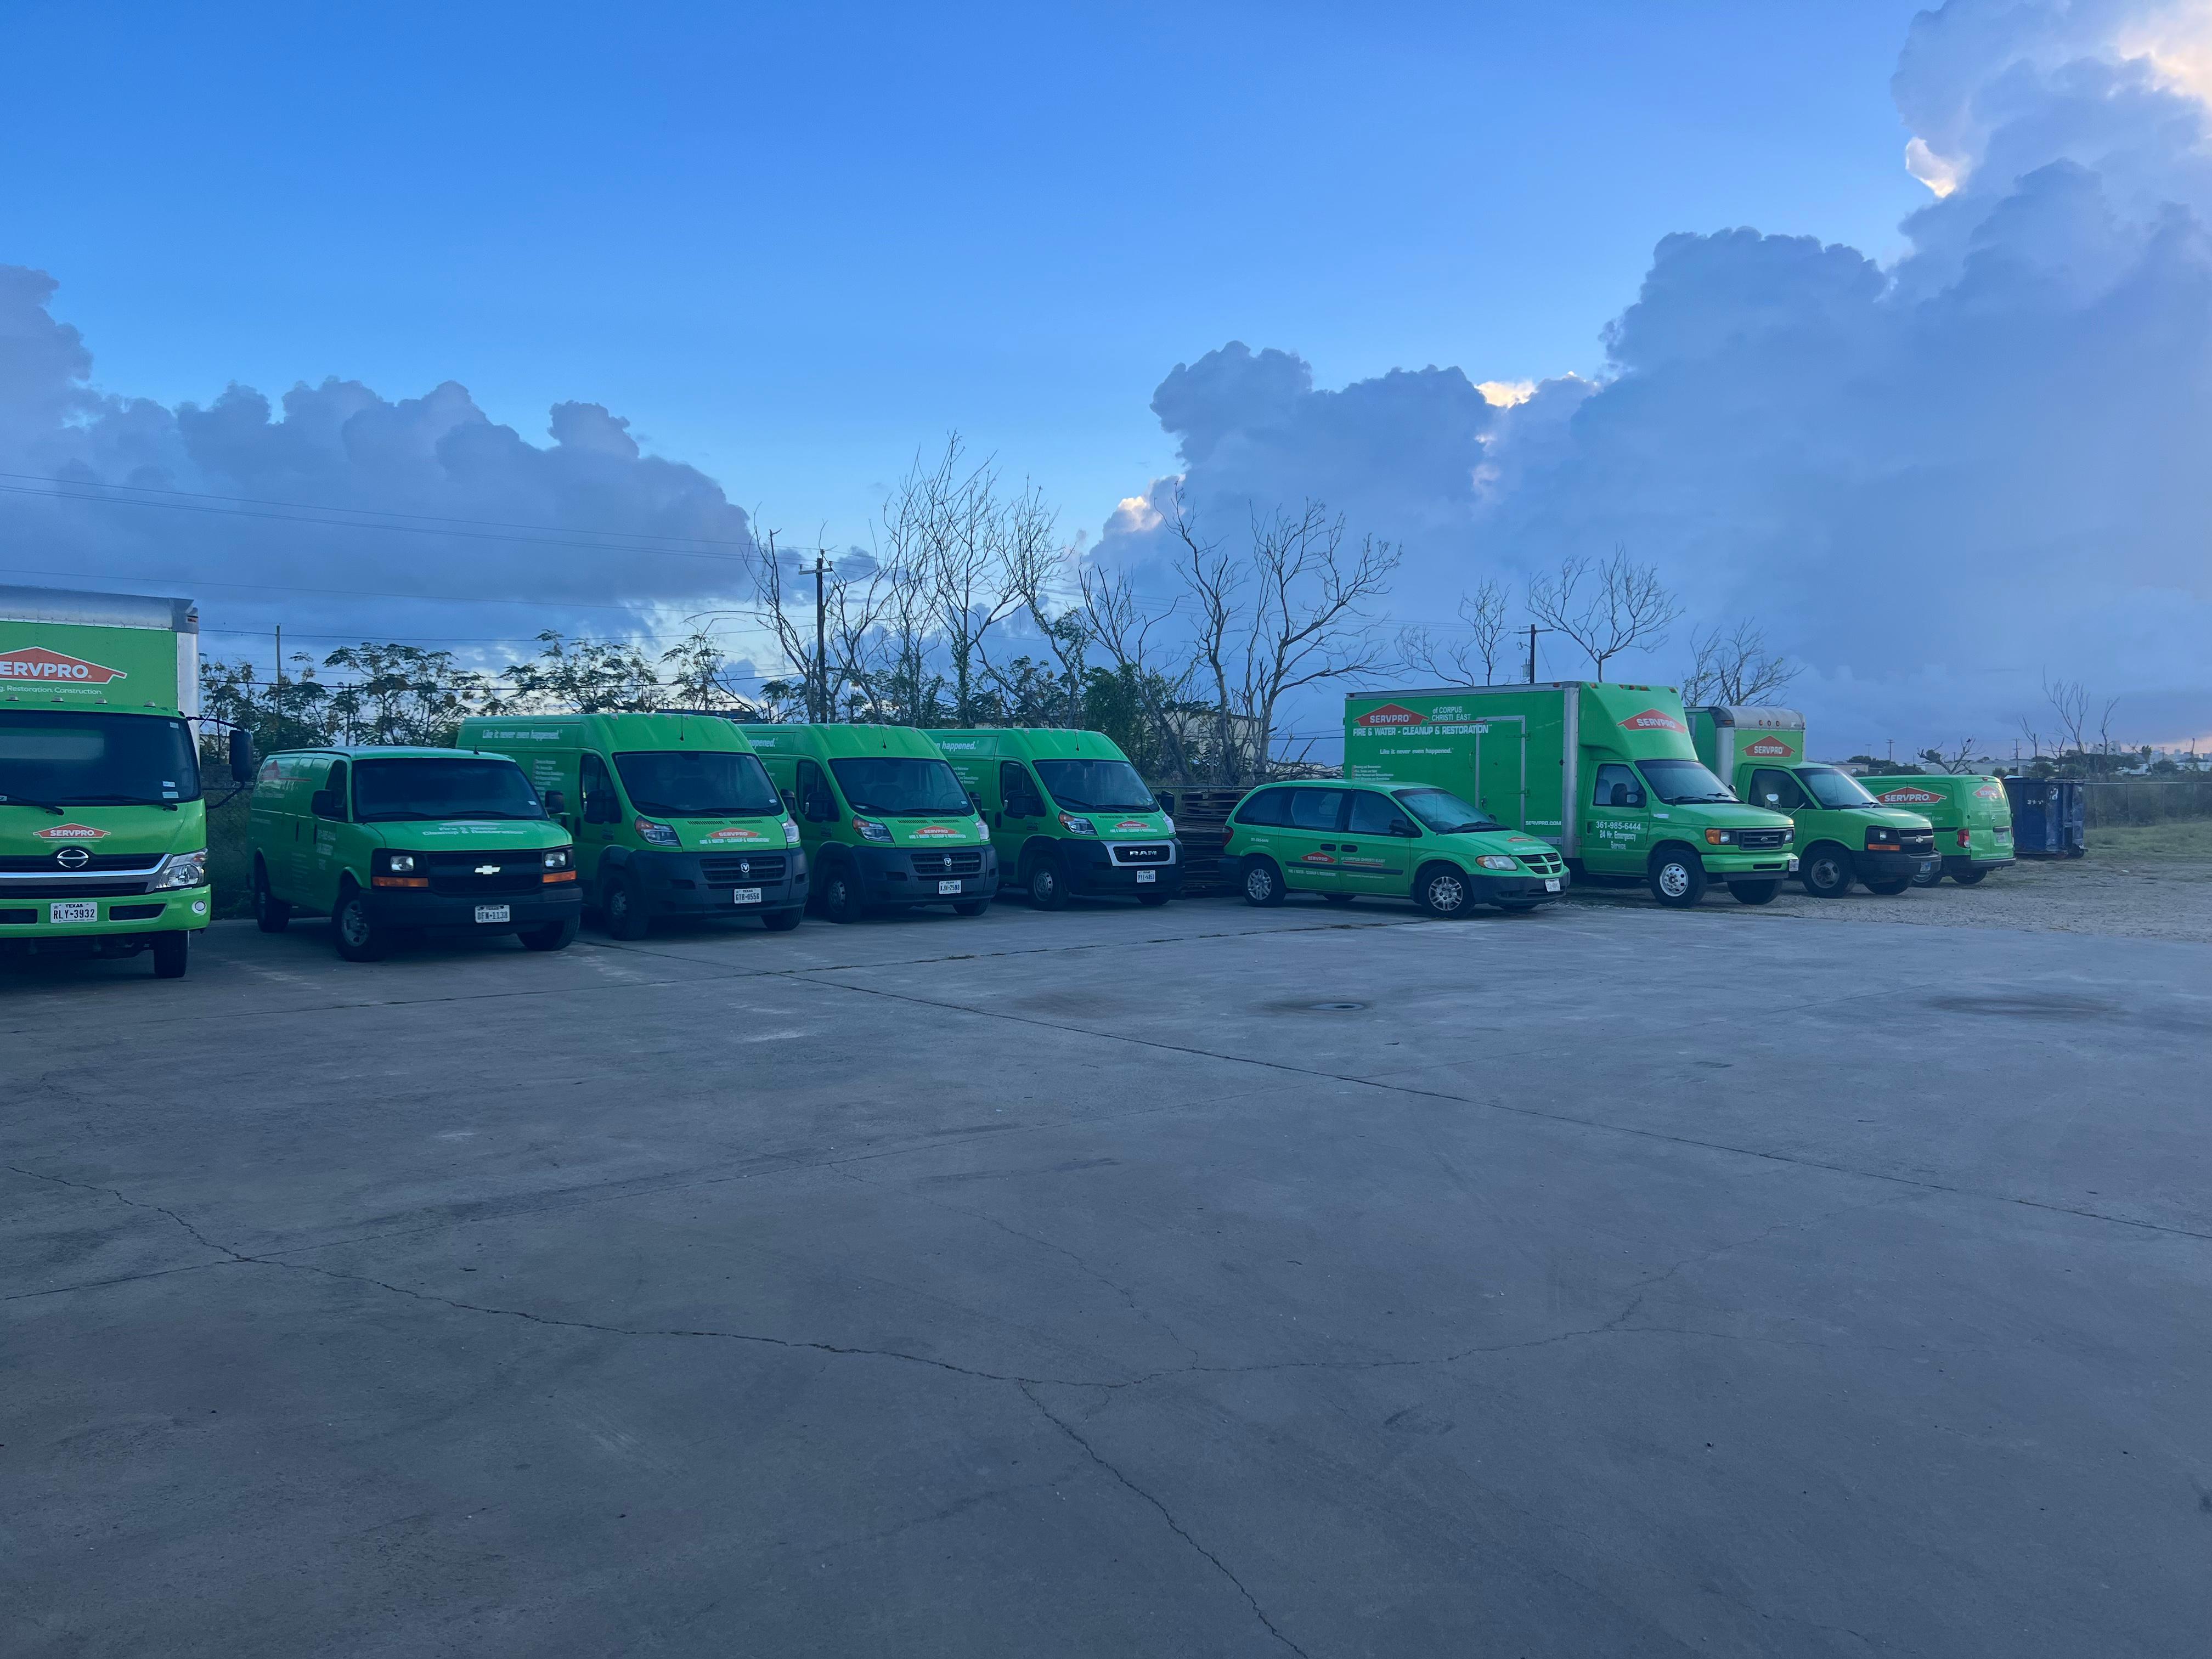 The SERVPRO team ready for an early day.